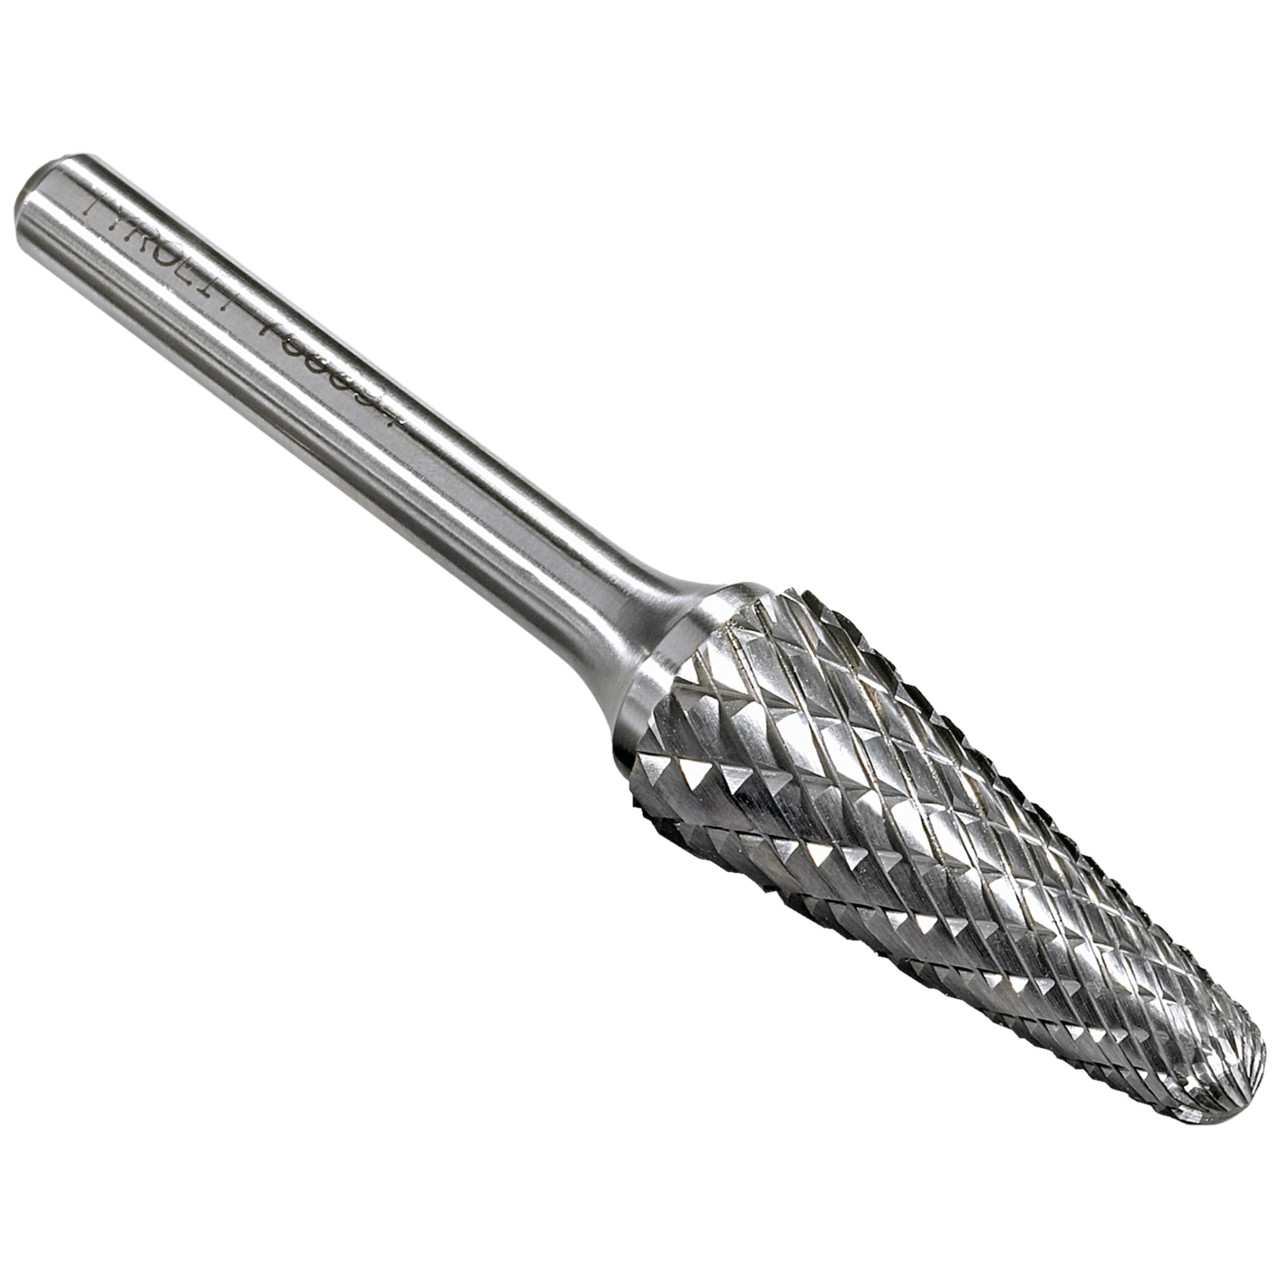 TYROLIT carbide end mill DxT-SxL 10x19-6x65 For cast iron, steel and stainless steel, shape: 52KEL - round taper, Art. 766068